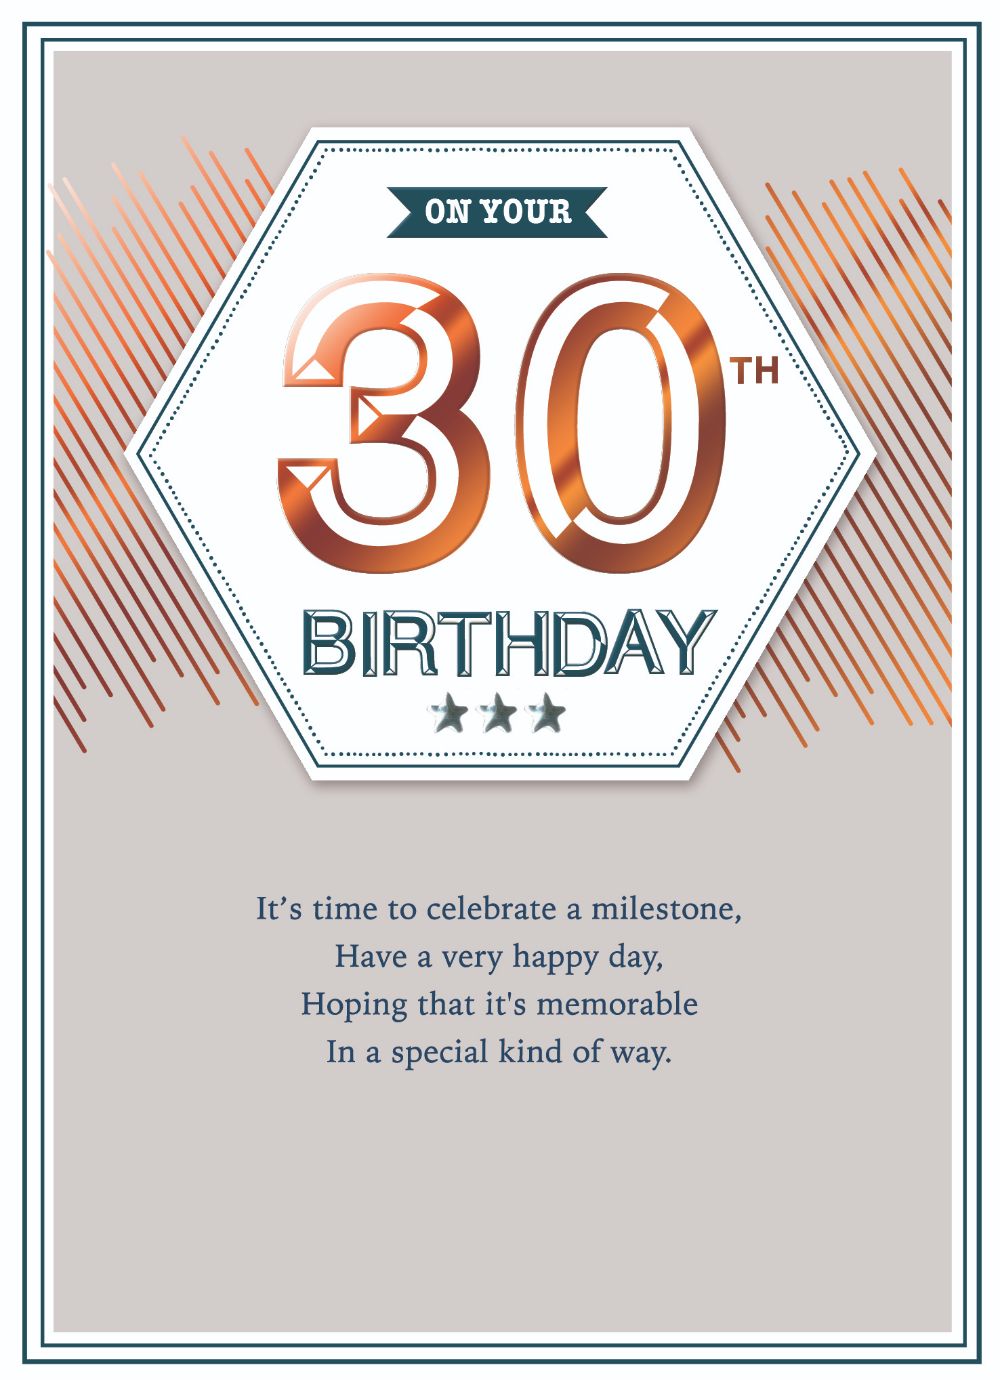 On Your 30th Birthday Embellished Birthday Greeting Card